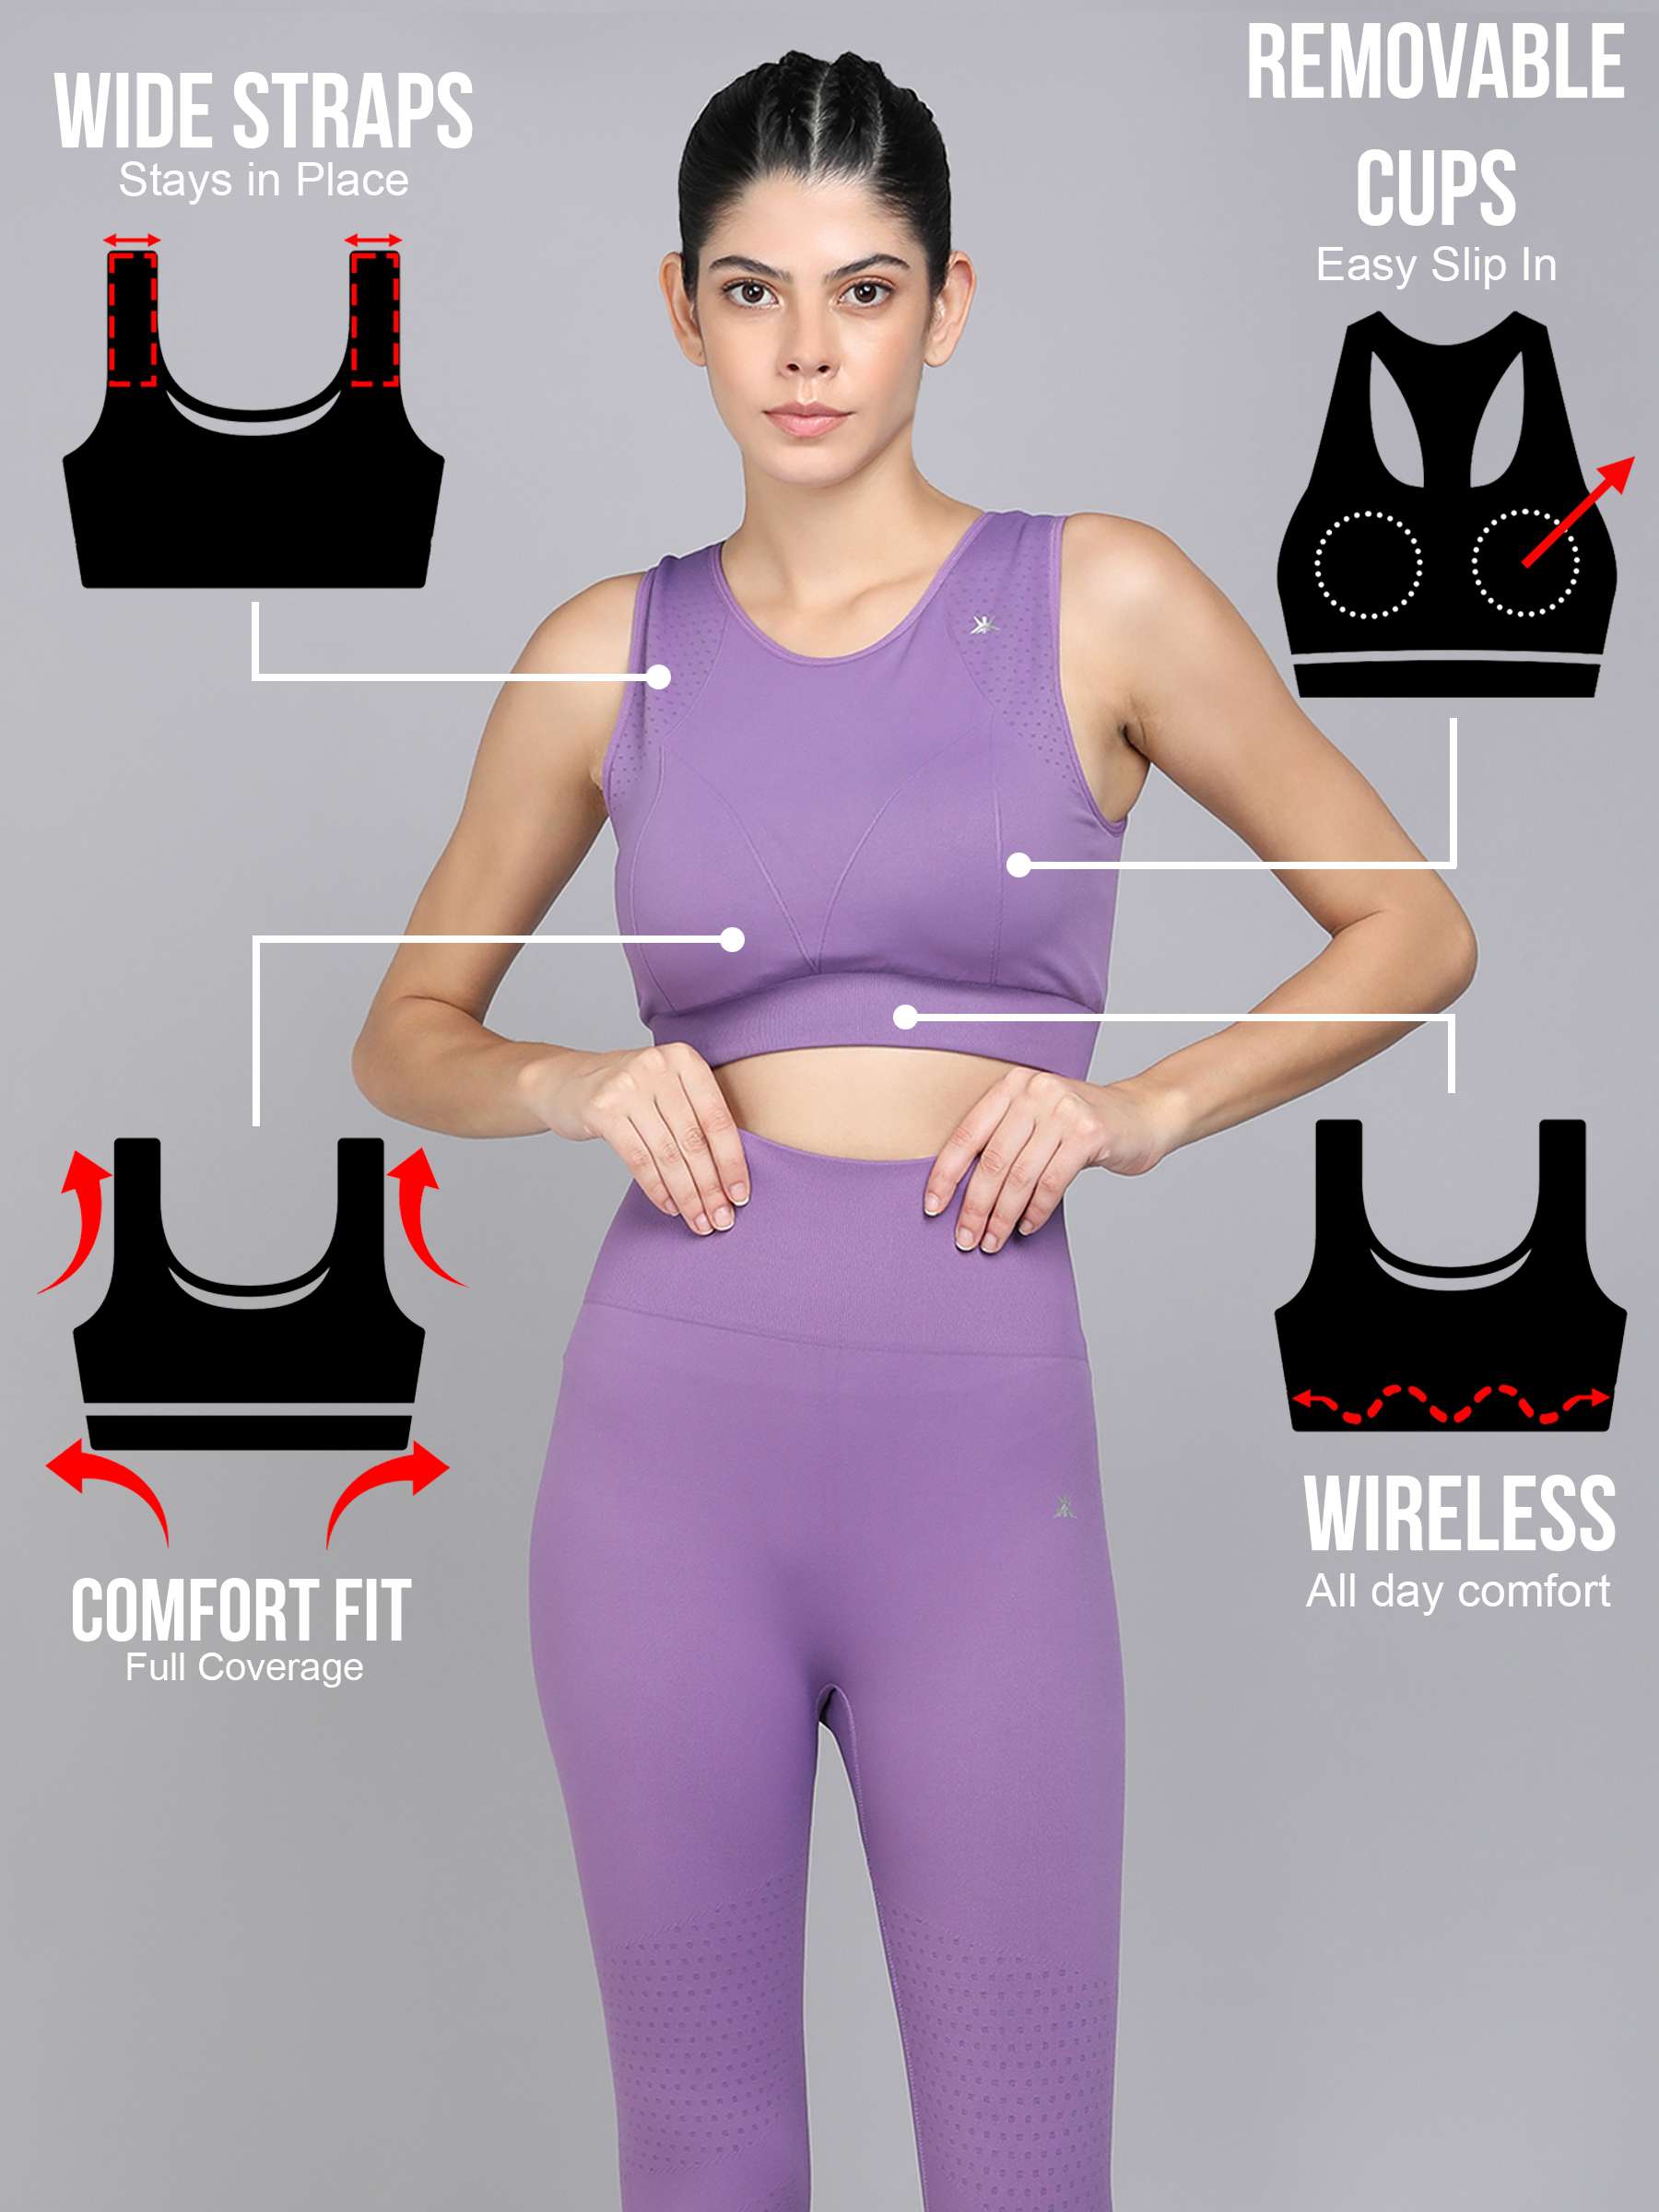 nsendm Female Underwear Adult Custom Sports Bra 2 Pieces Women's Bra  Compression High Support Bra for Women's Every Day Wear Exercise and Bras(Multicolour,  XXL) 